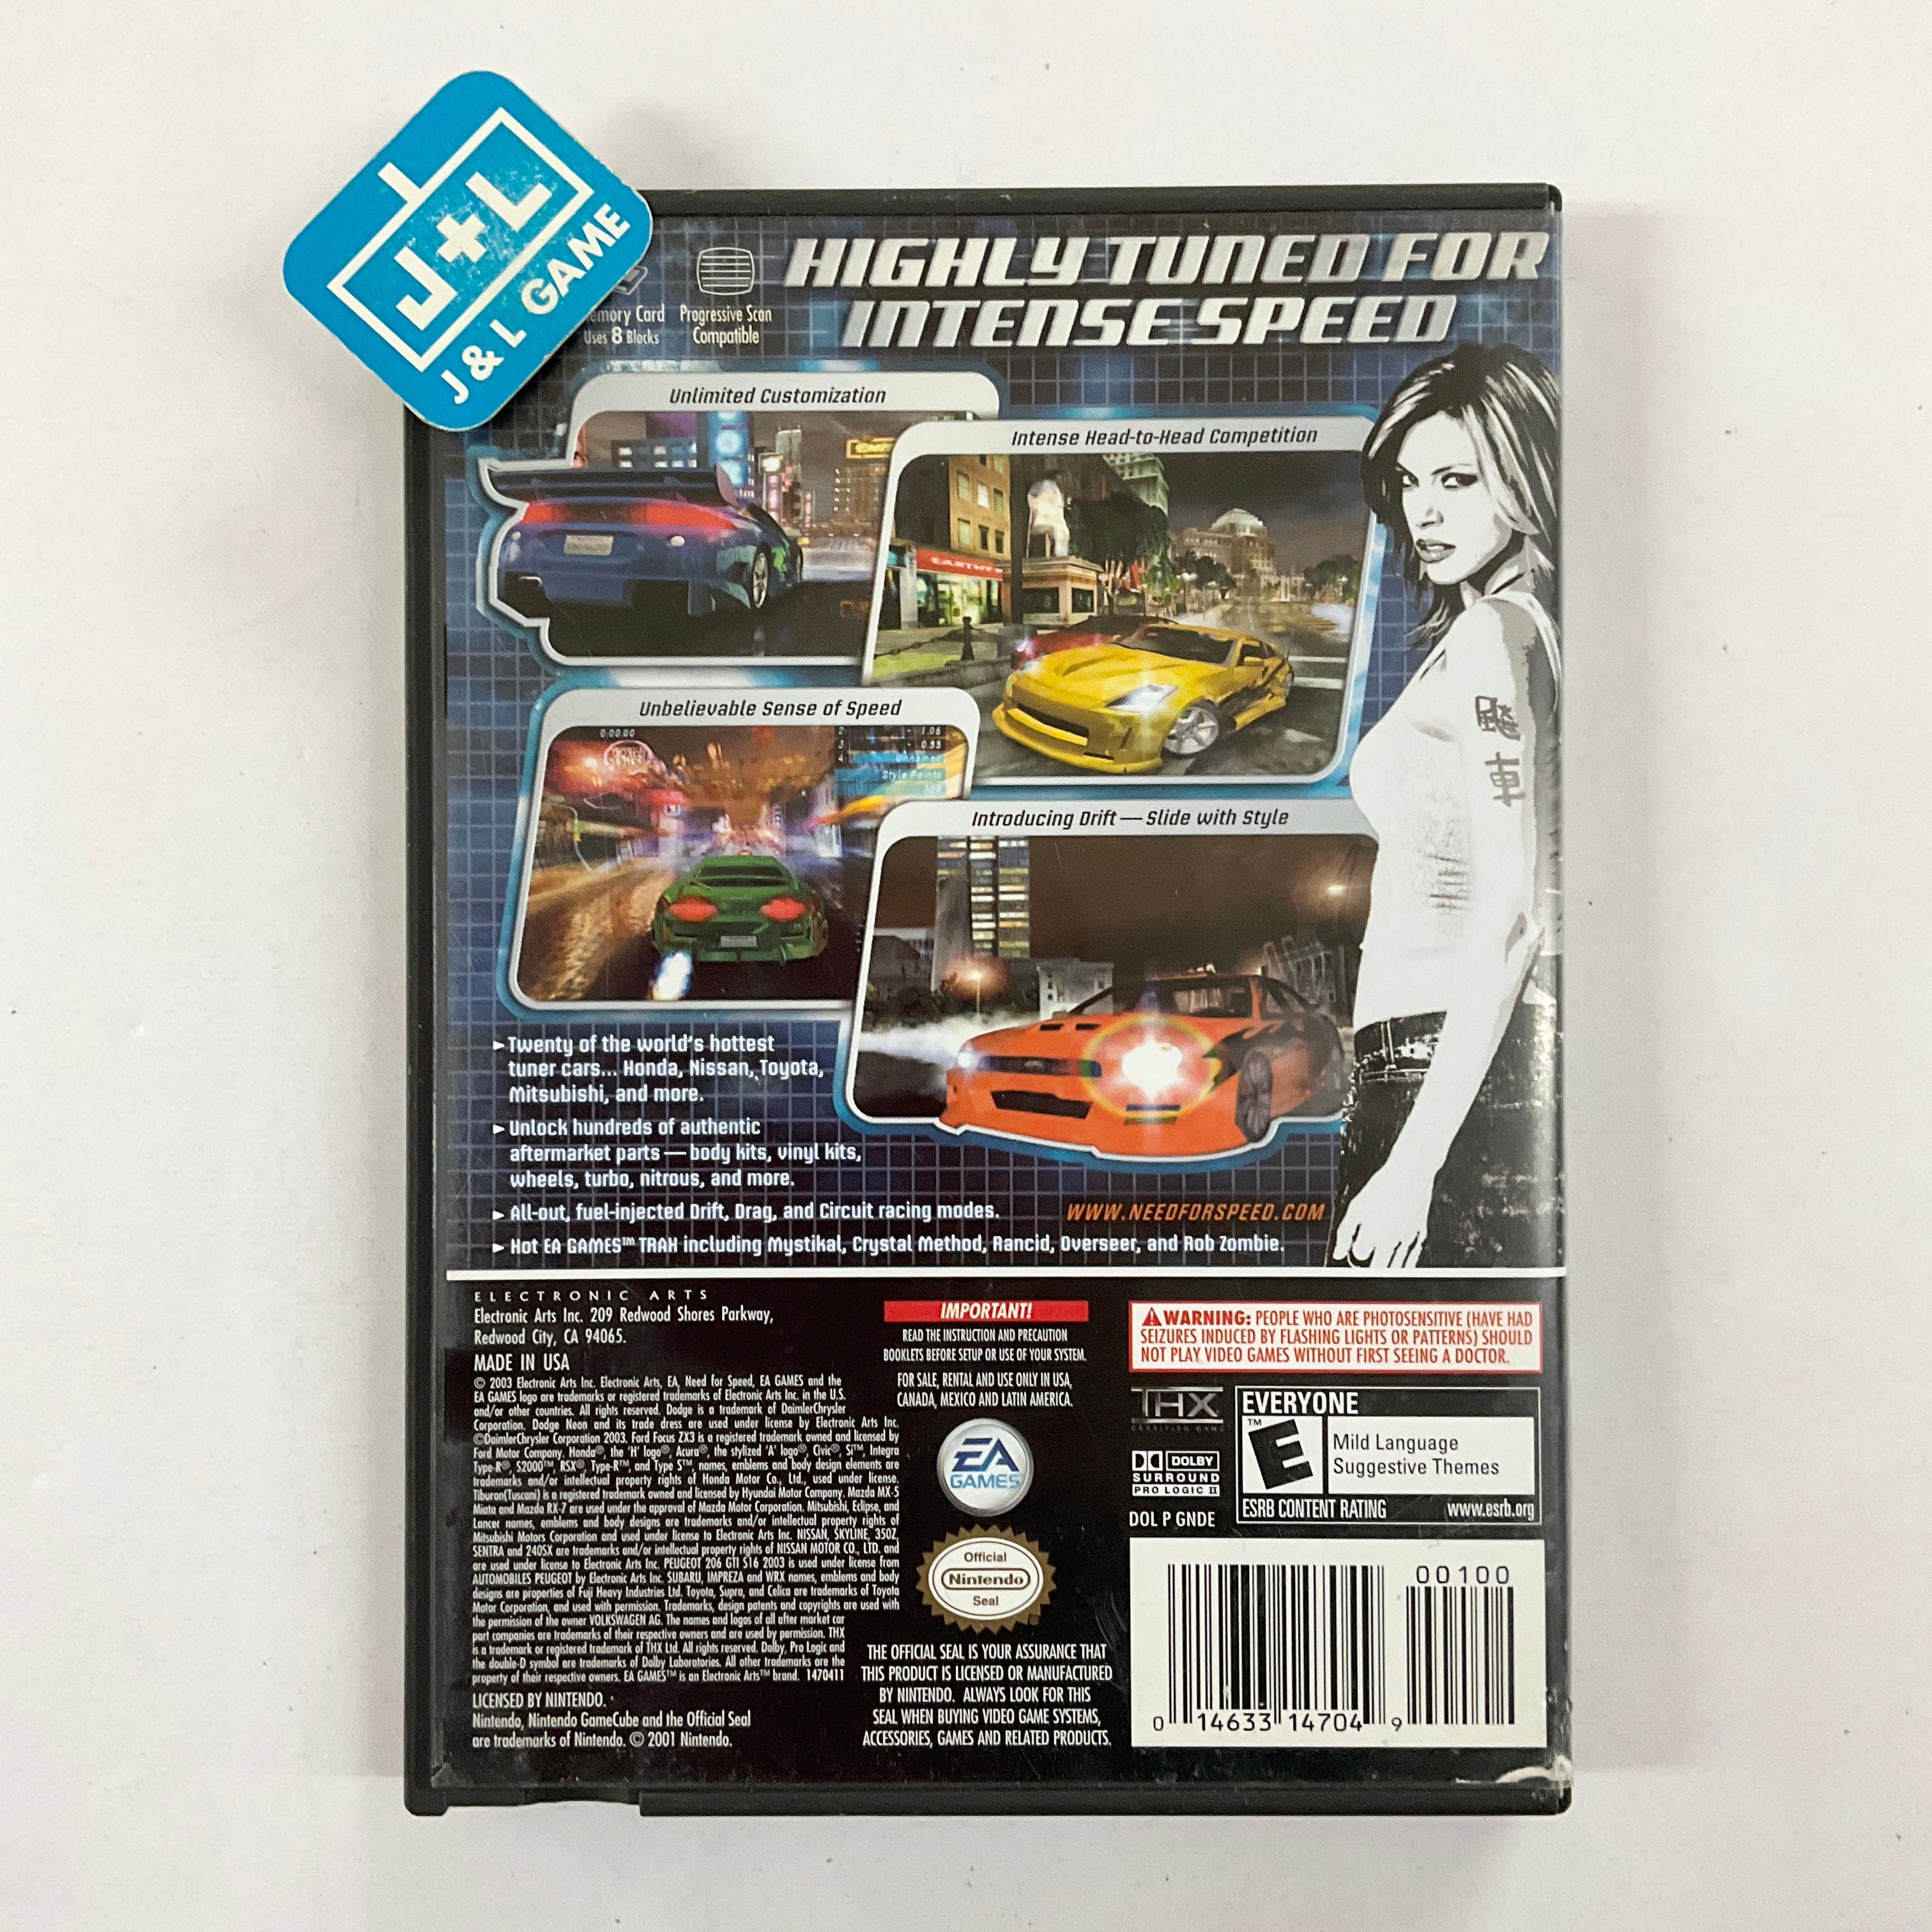 Need for Speed Underground - (GC) GameCube [Pre-Owned] Video Games Electronic Arts   